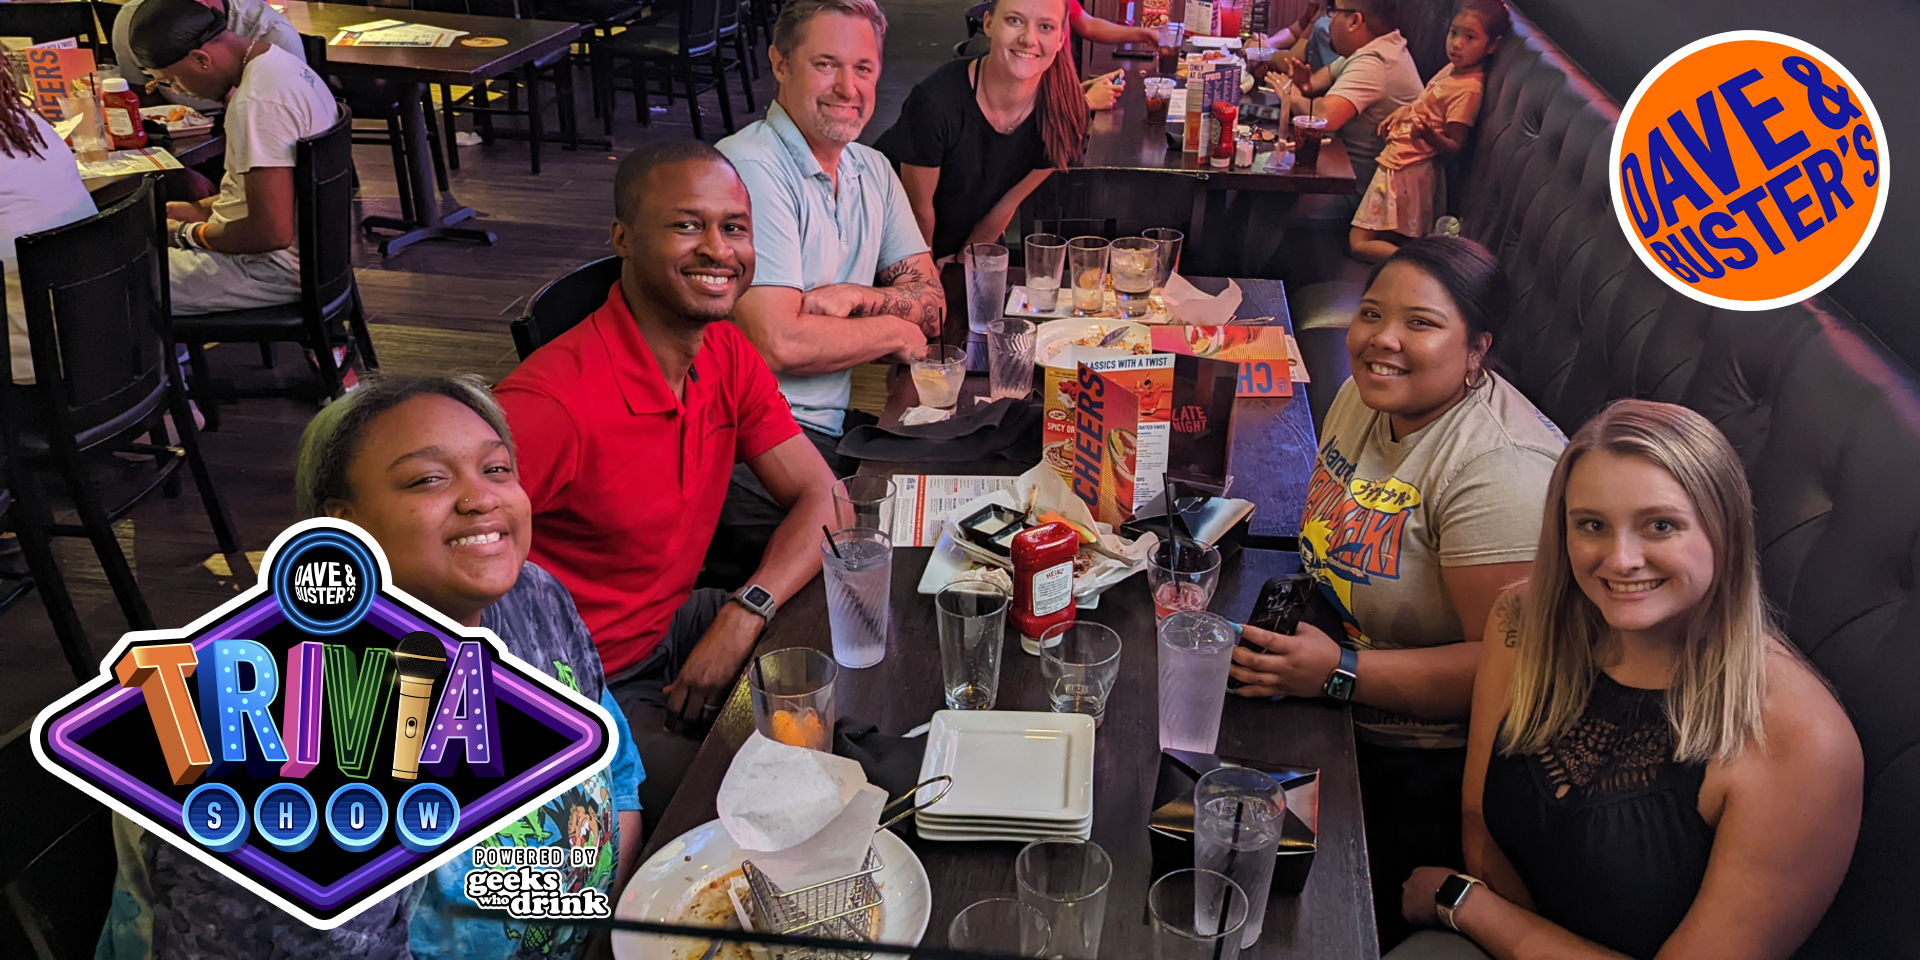 Geeks Who Drink Trivia Night at Dave and Buster's - Birmingham promotional image